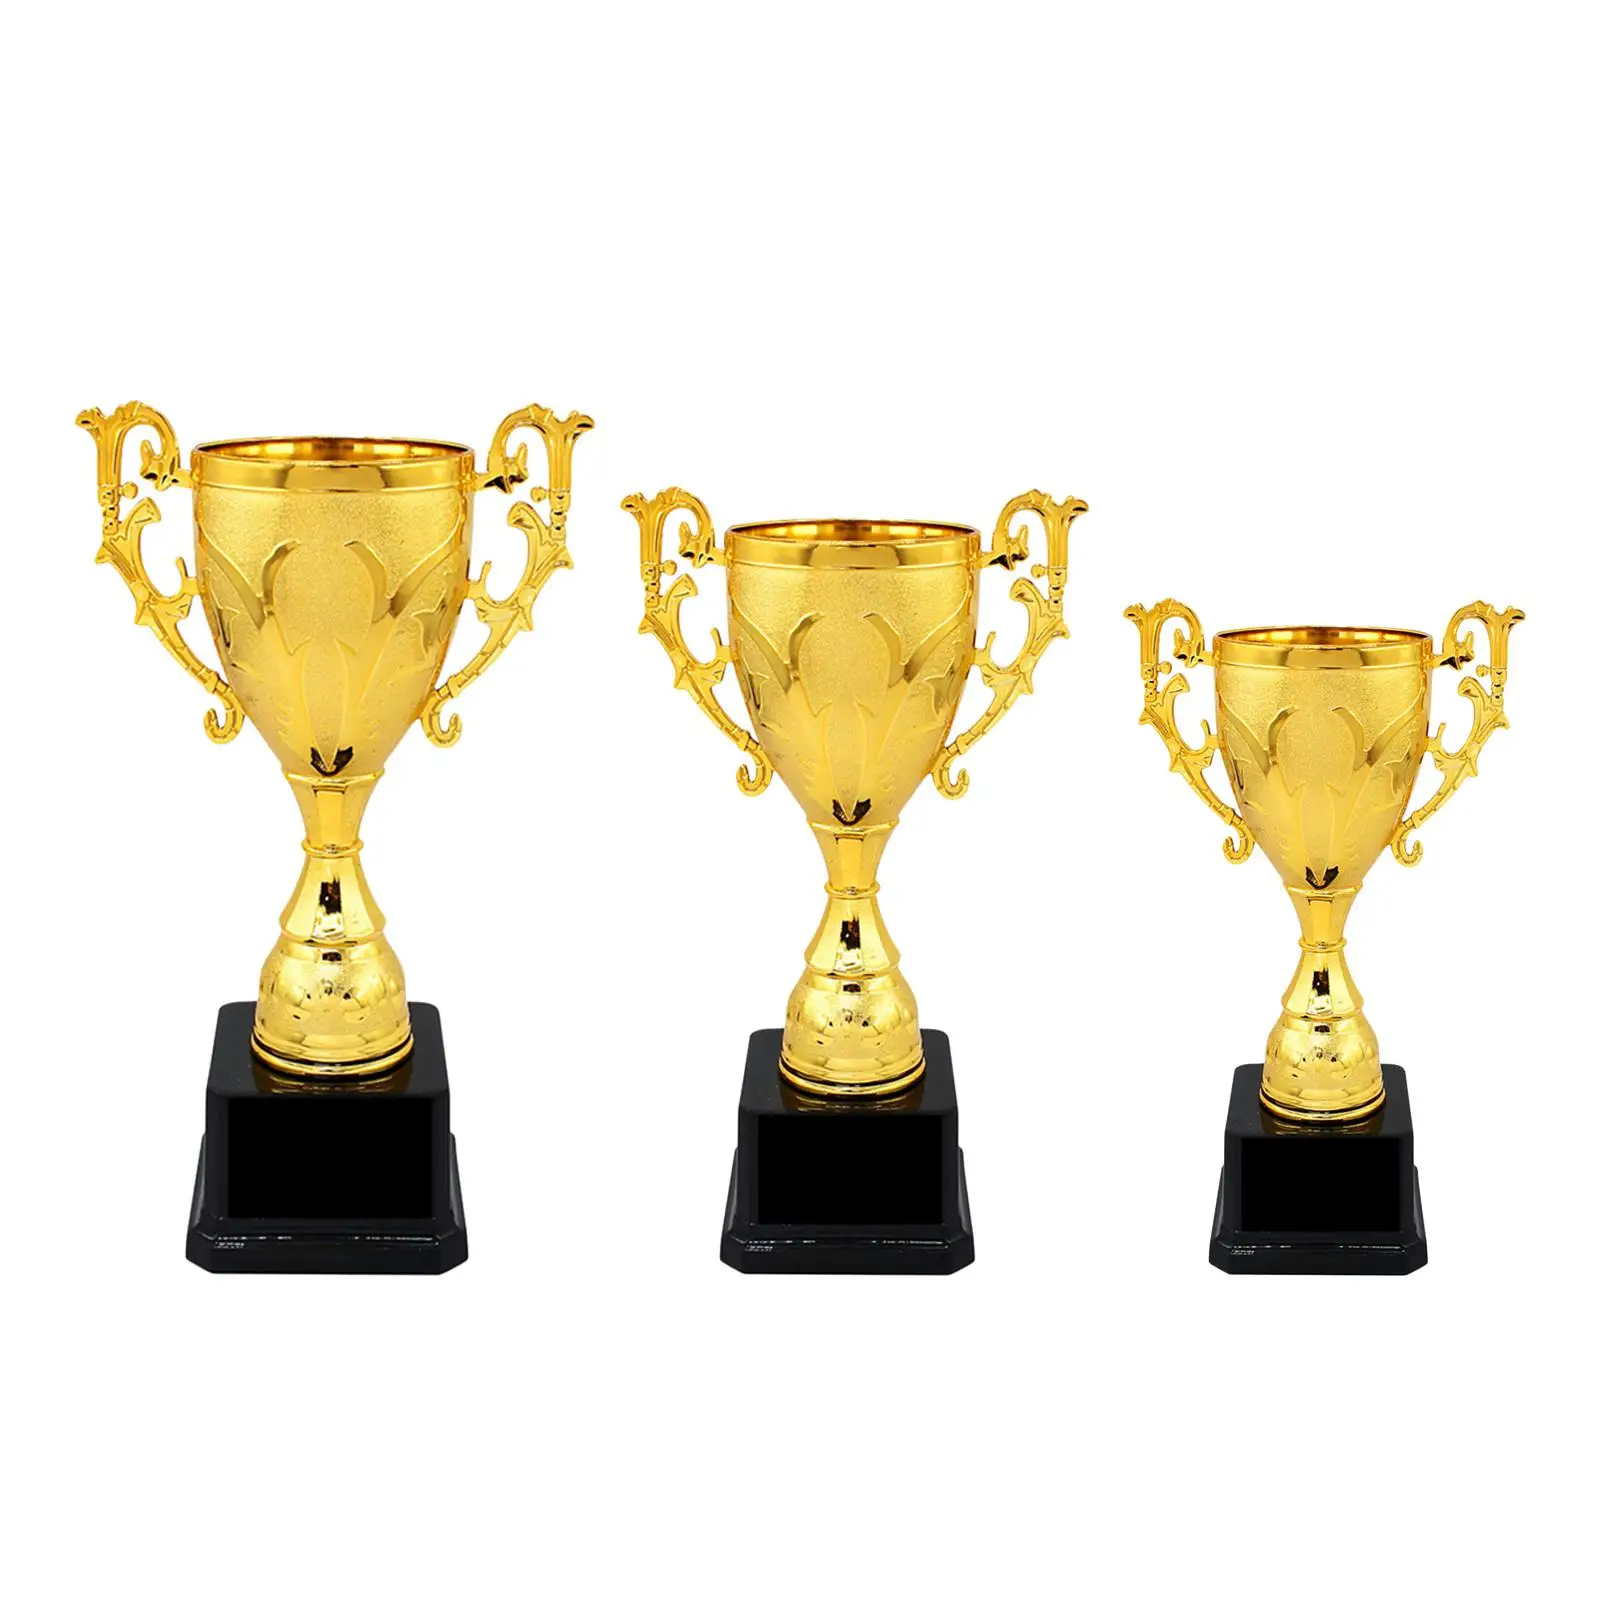 Award Trophy Kids Small Trophy Prize Trophy Cup Award for Party Favors Soccer Football League Match Celebrations Tournaments